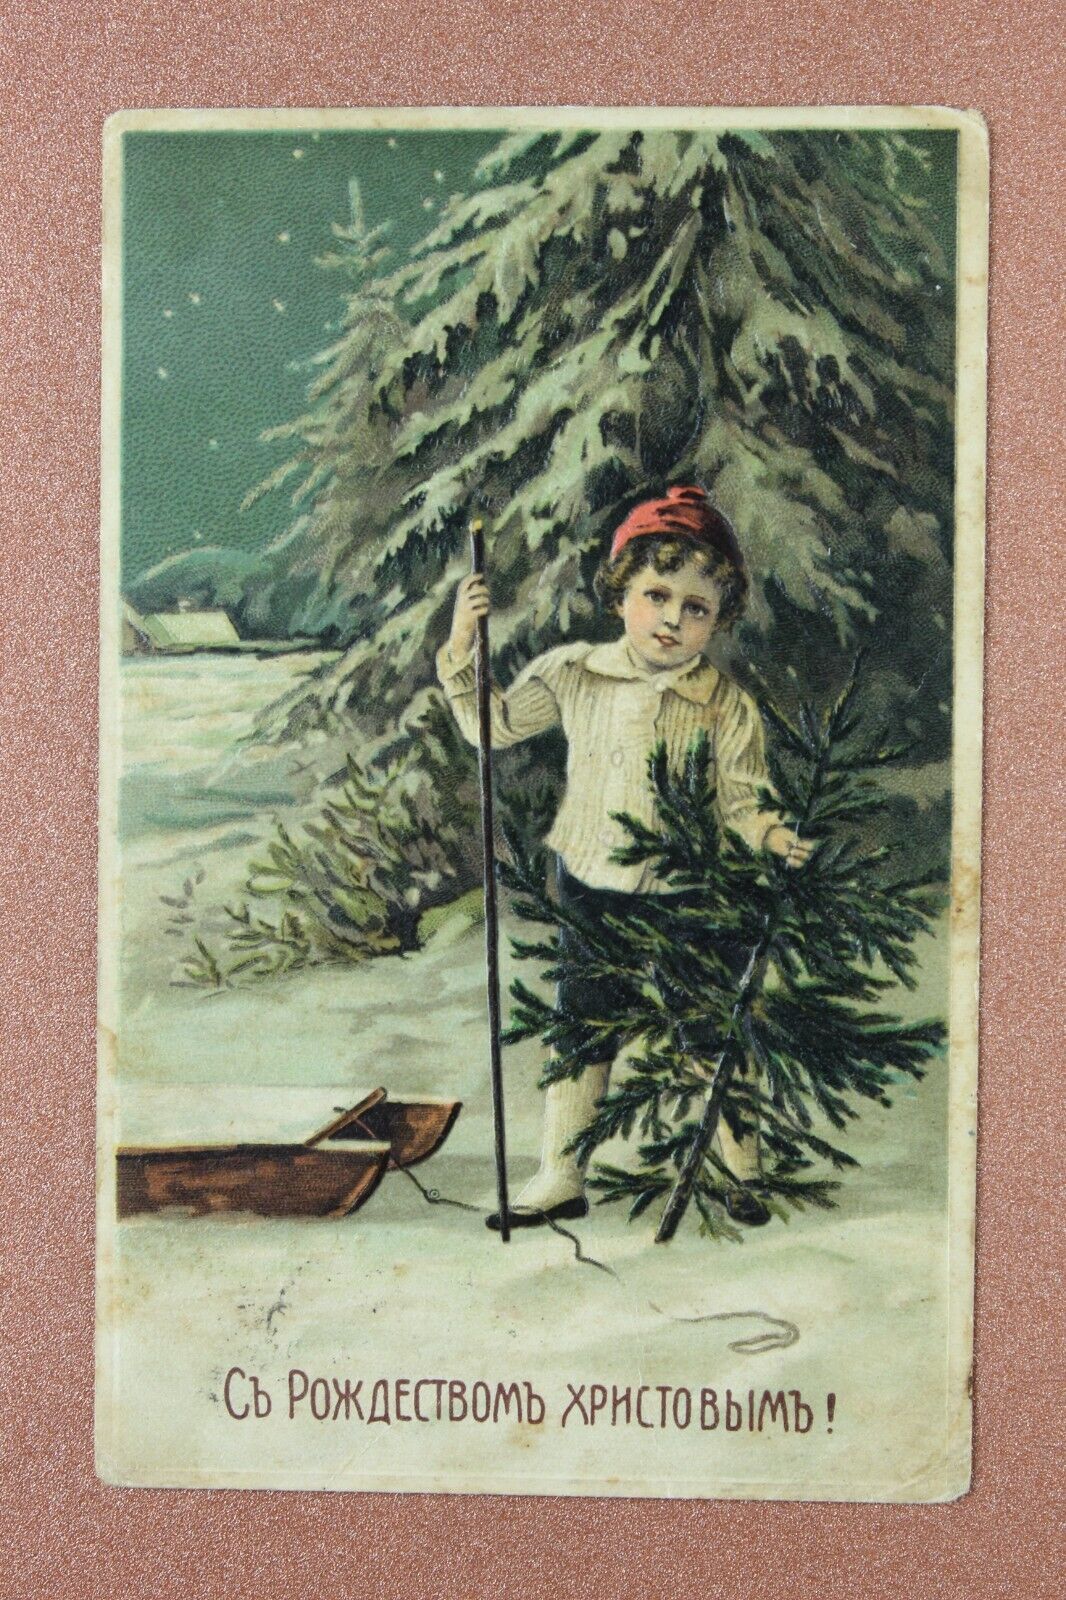 CHRISTMAS Belle Fashion Boy - red cap. Old sled. Tsarist Russia postcard 1911s🎄